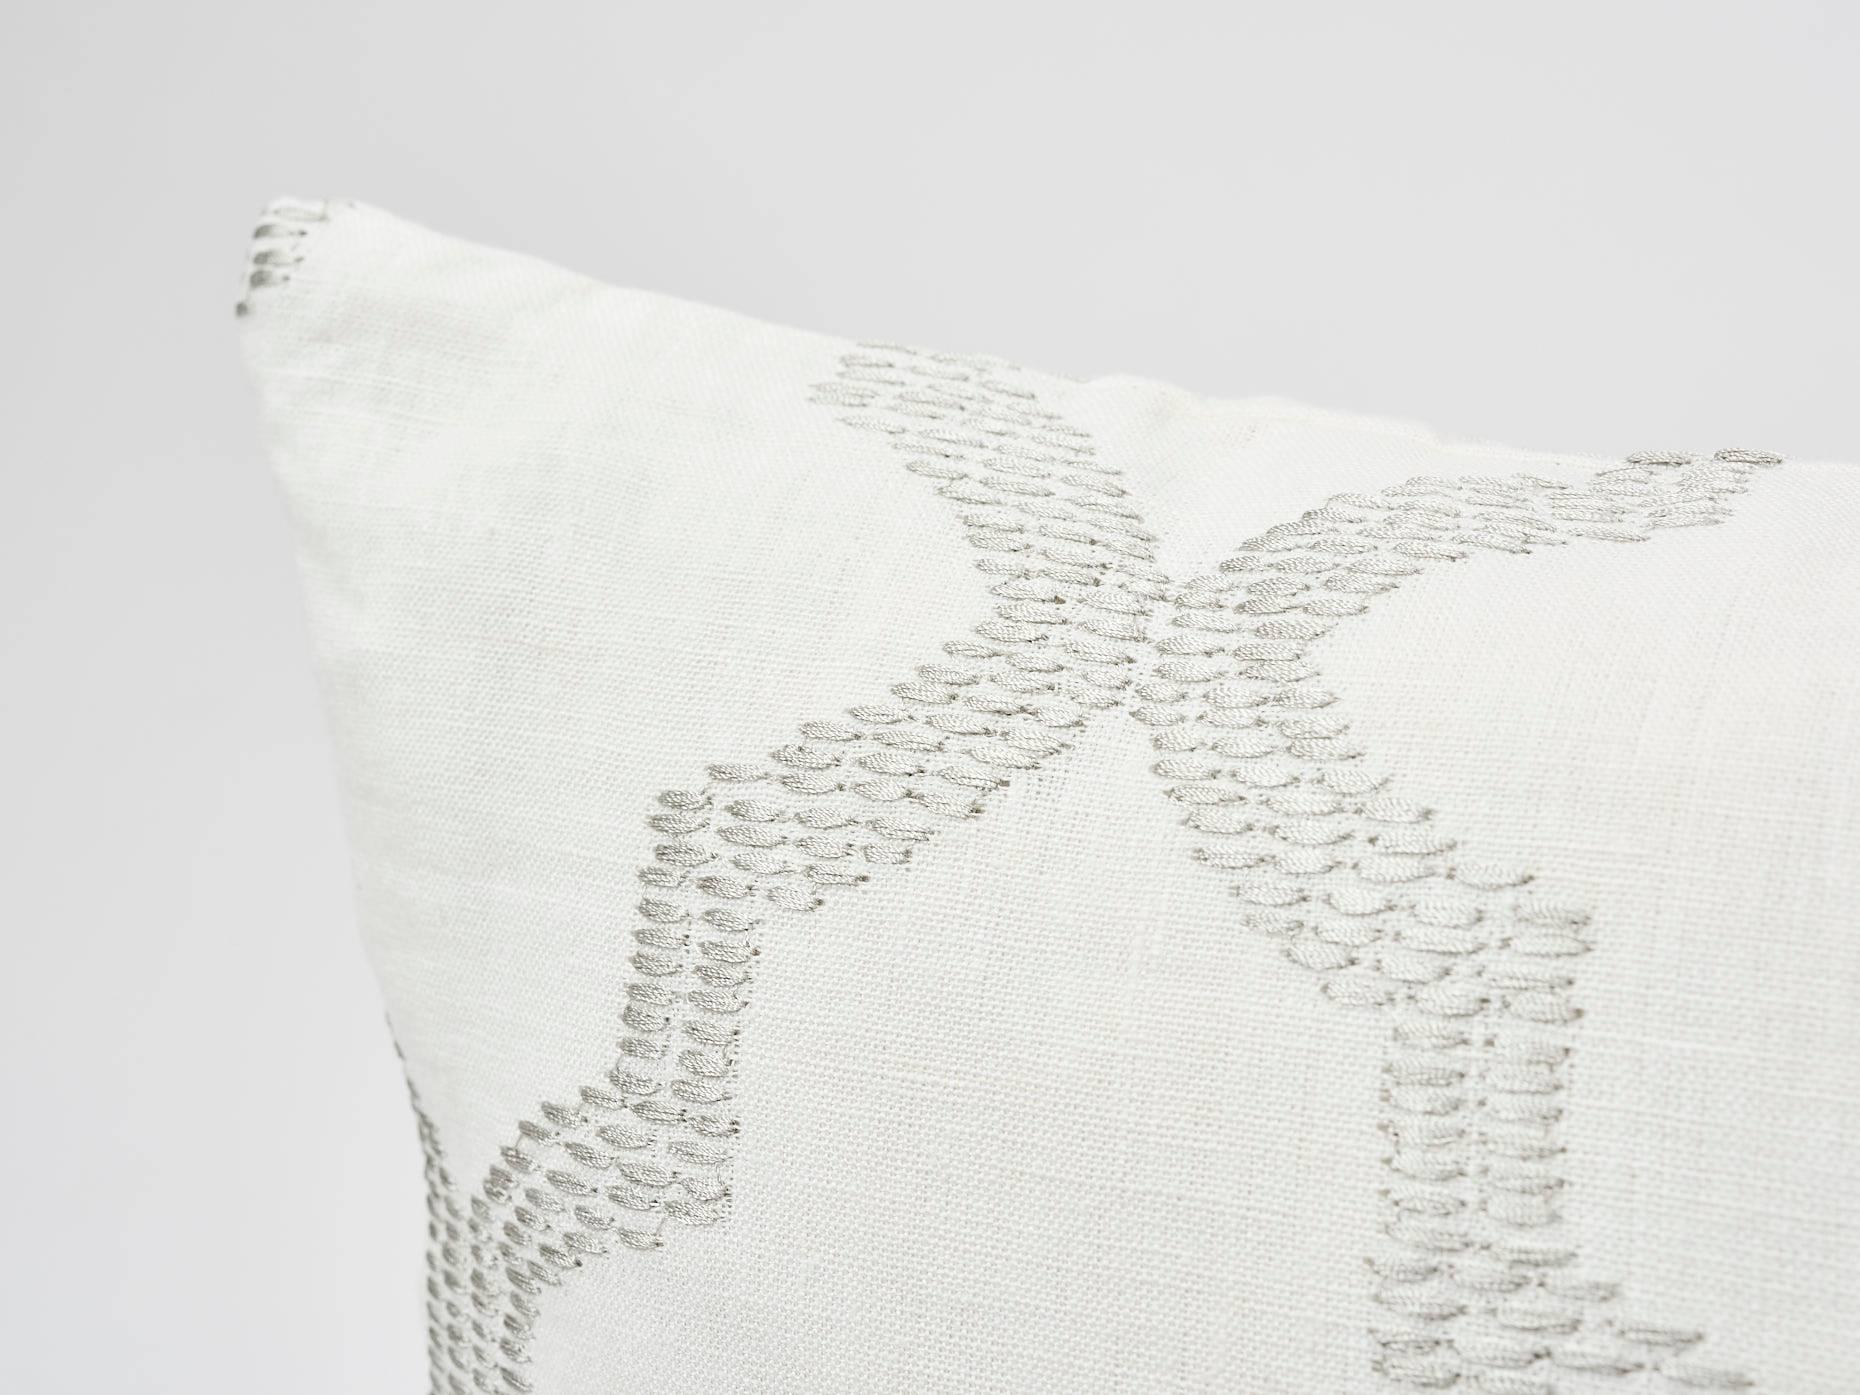 Modern meets Moroccan in this stunning geometric Schumacher pattern. Tangier Embroidery is a fretwork motif embroidered in thick rayon yarn adding dimension and sheen. Subtle variations are part of its inherent natural beauty. Featured as a